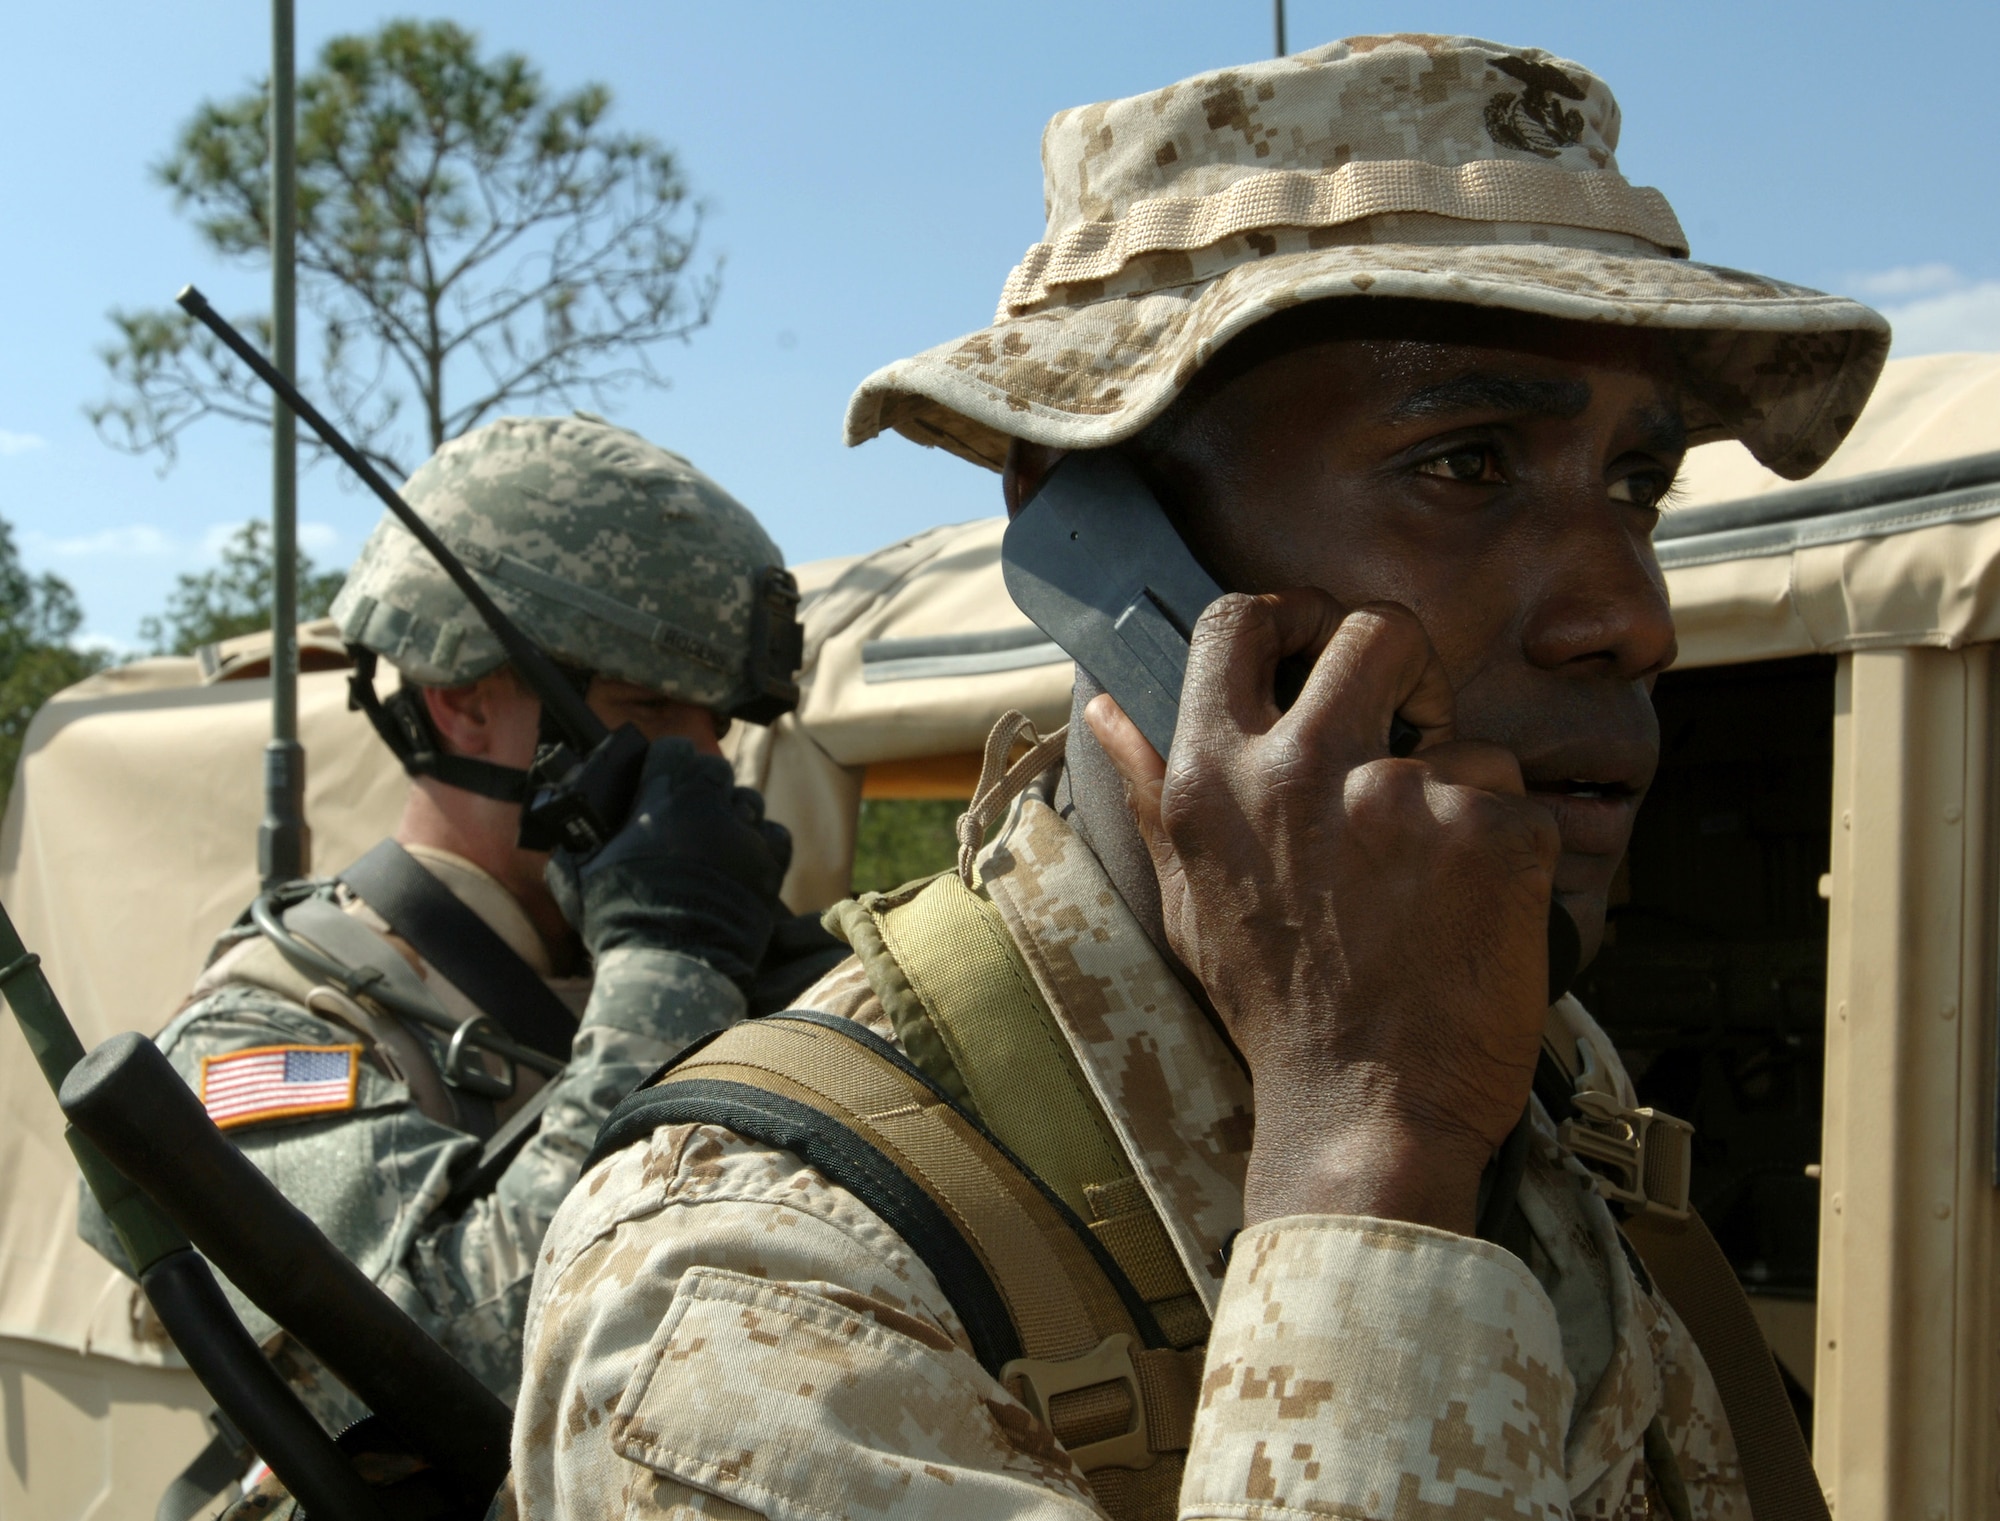 Marine Staff Sgt. Aamir Greene, right, communicates with aircraft using a PRC-117 radio while Army Staff Sgt. Jimmy Rogers coordinates with a 42-person scout patrol in the mock village at Avon Park, Fla., March 29, 2006, as part of Atlantic Strike III, a joint air and ground training event.  Sergeant Greene is with the 4th Air Naval Gunfire Liaison Company and Sergeant Rogers is with the 1st Cavalry Division at Fort Hood, Texas. (U.S. Air Force photo/Staff Sgt. Ashley S. Brokop)